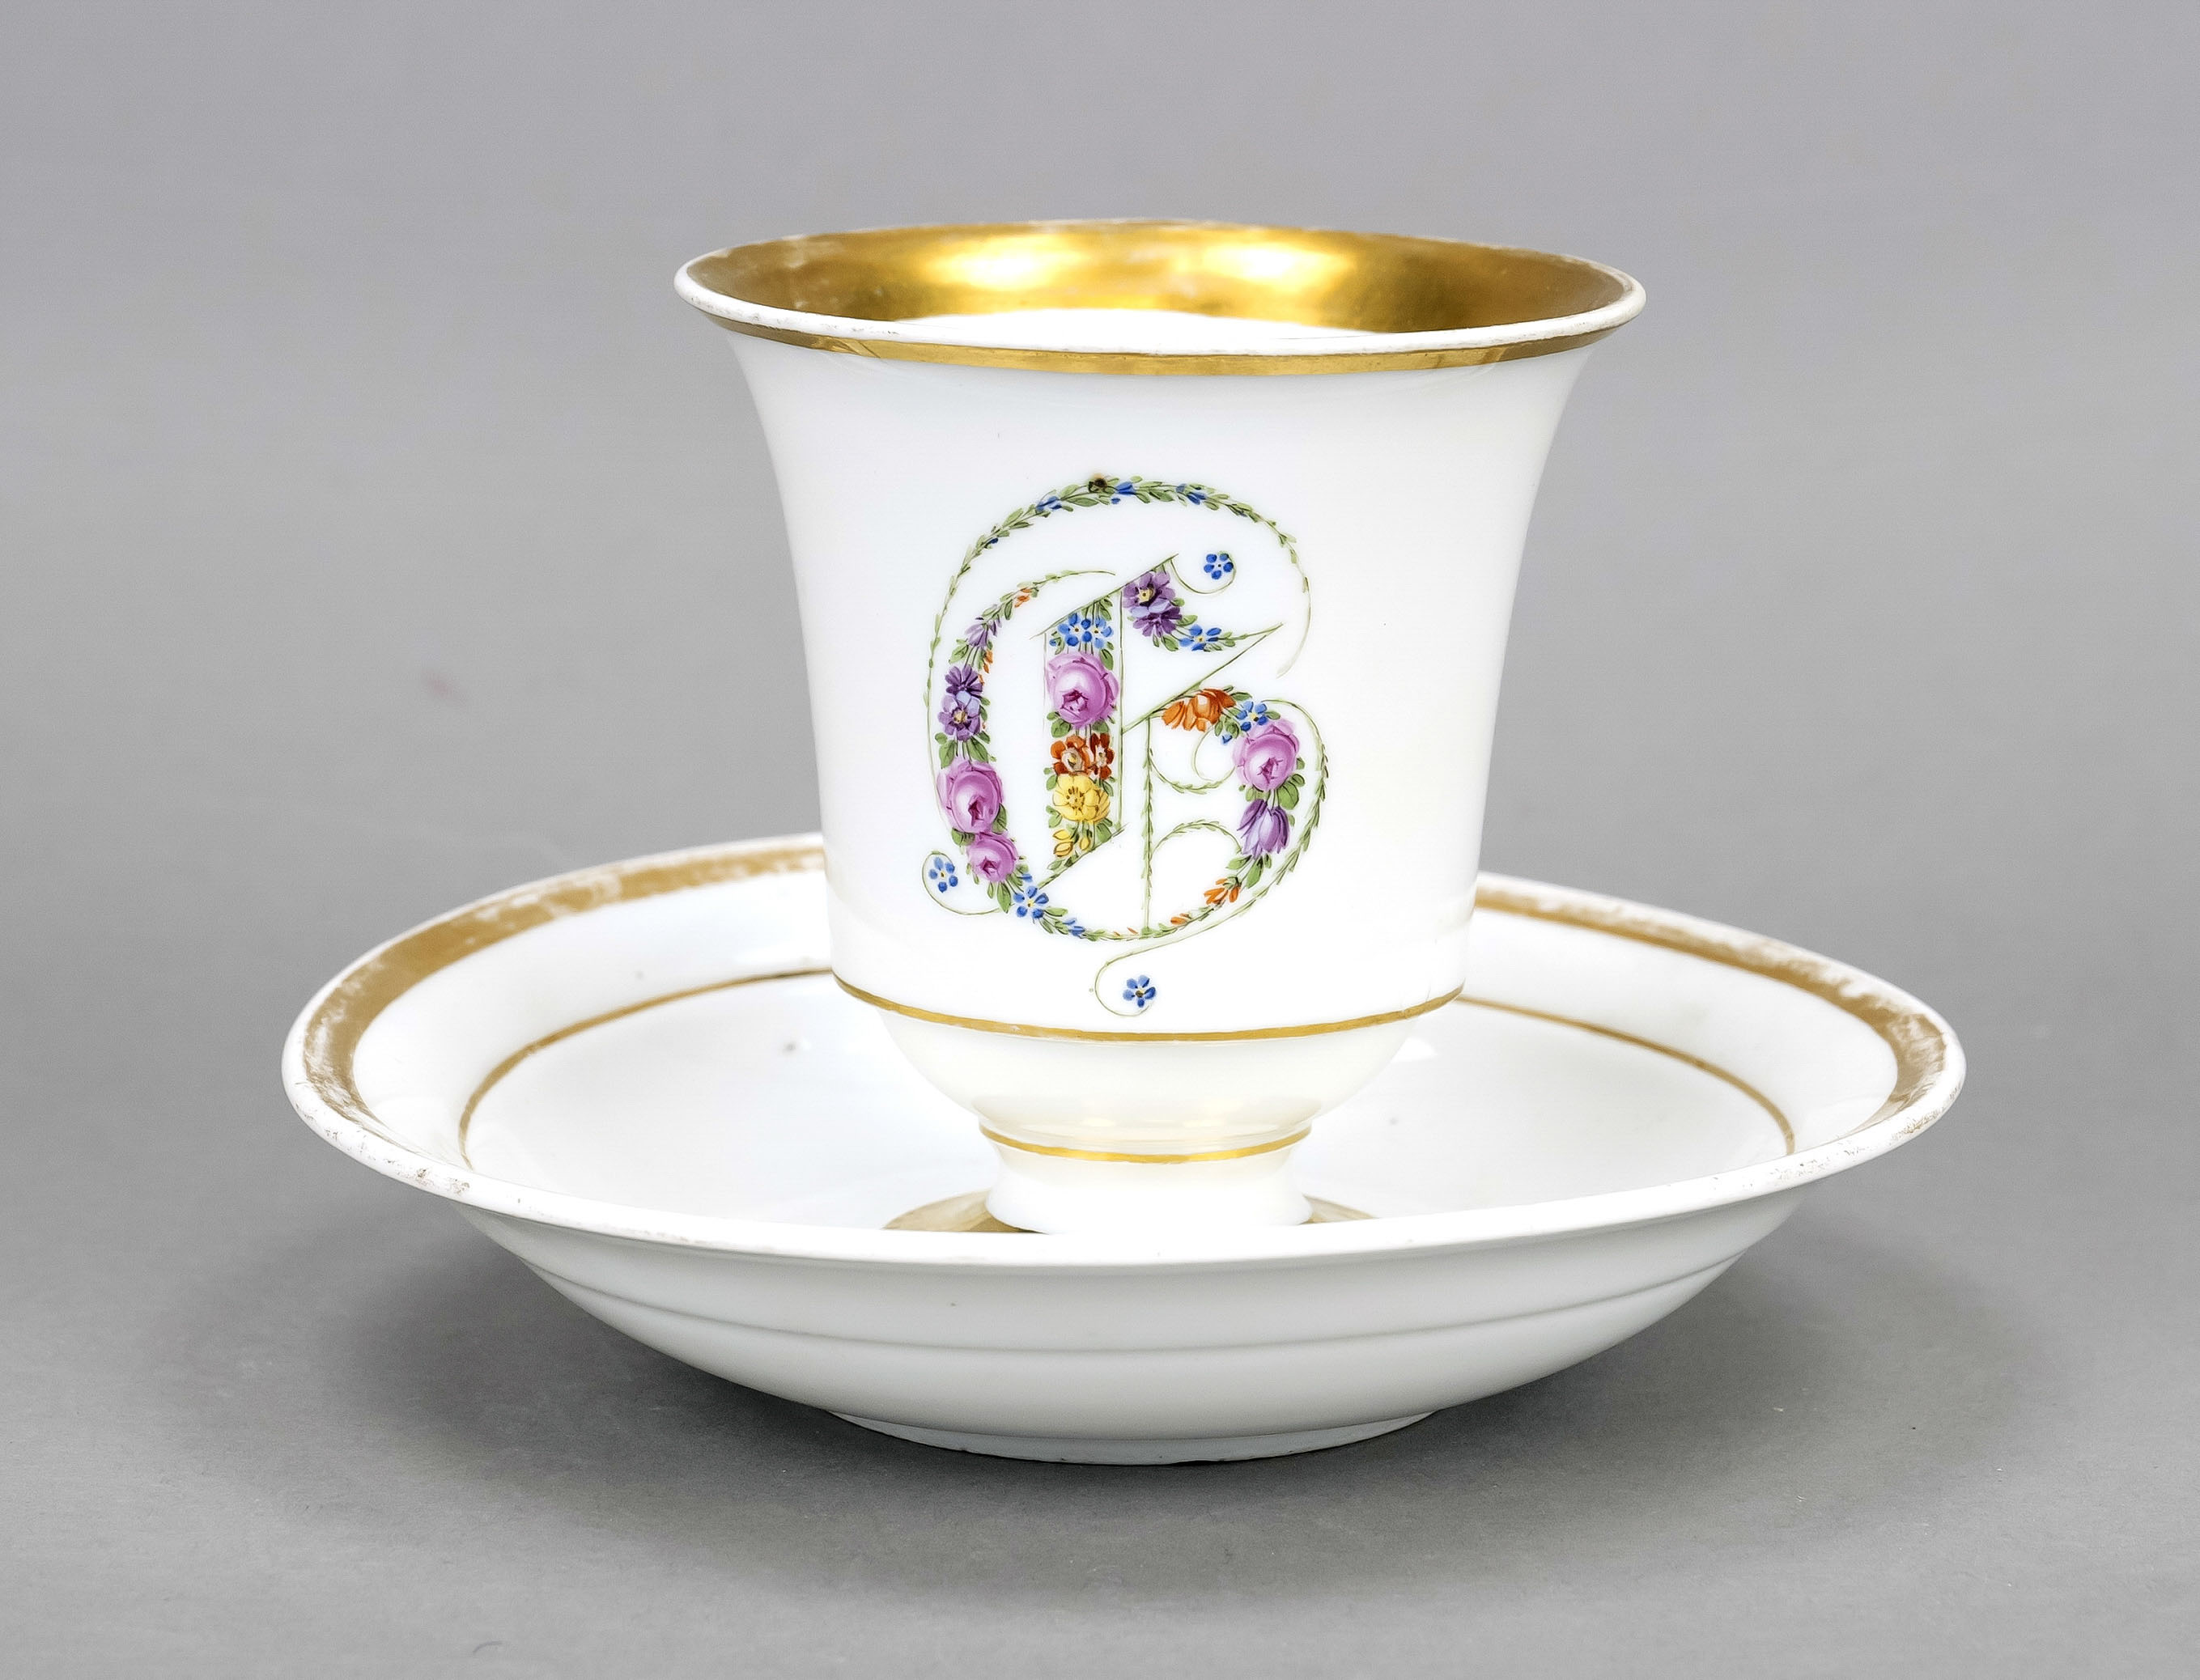 Cup and saucer, Meissen, 19th century, bell-shaped, polychrome flower painting on the front, forming